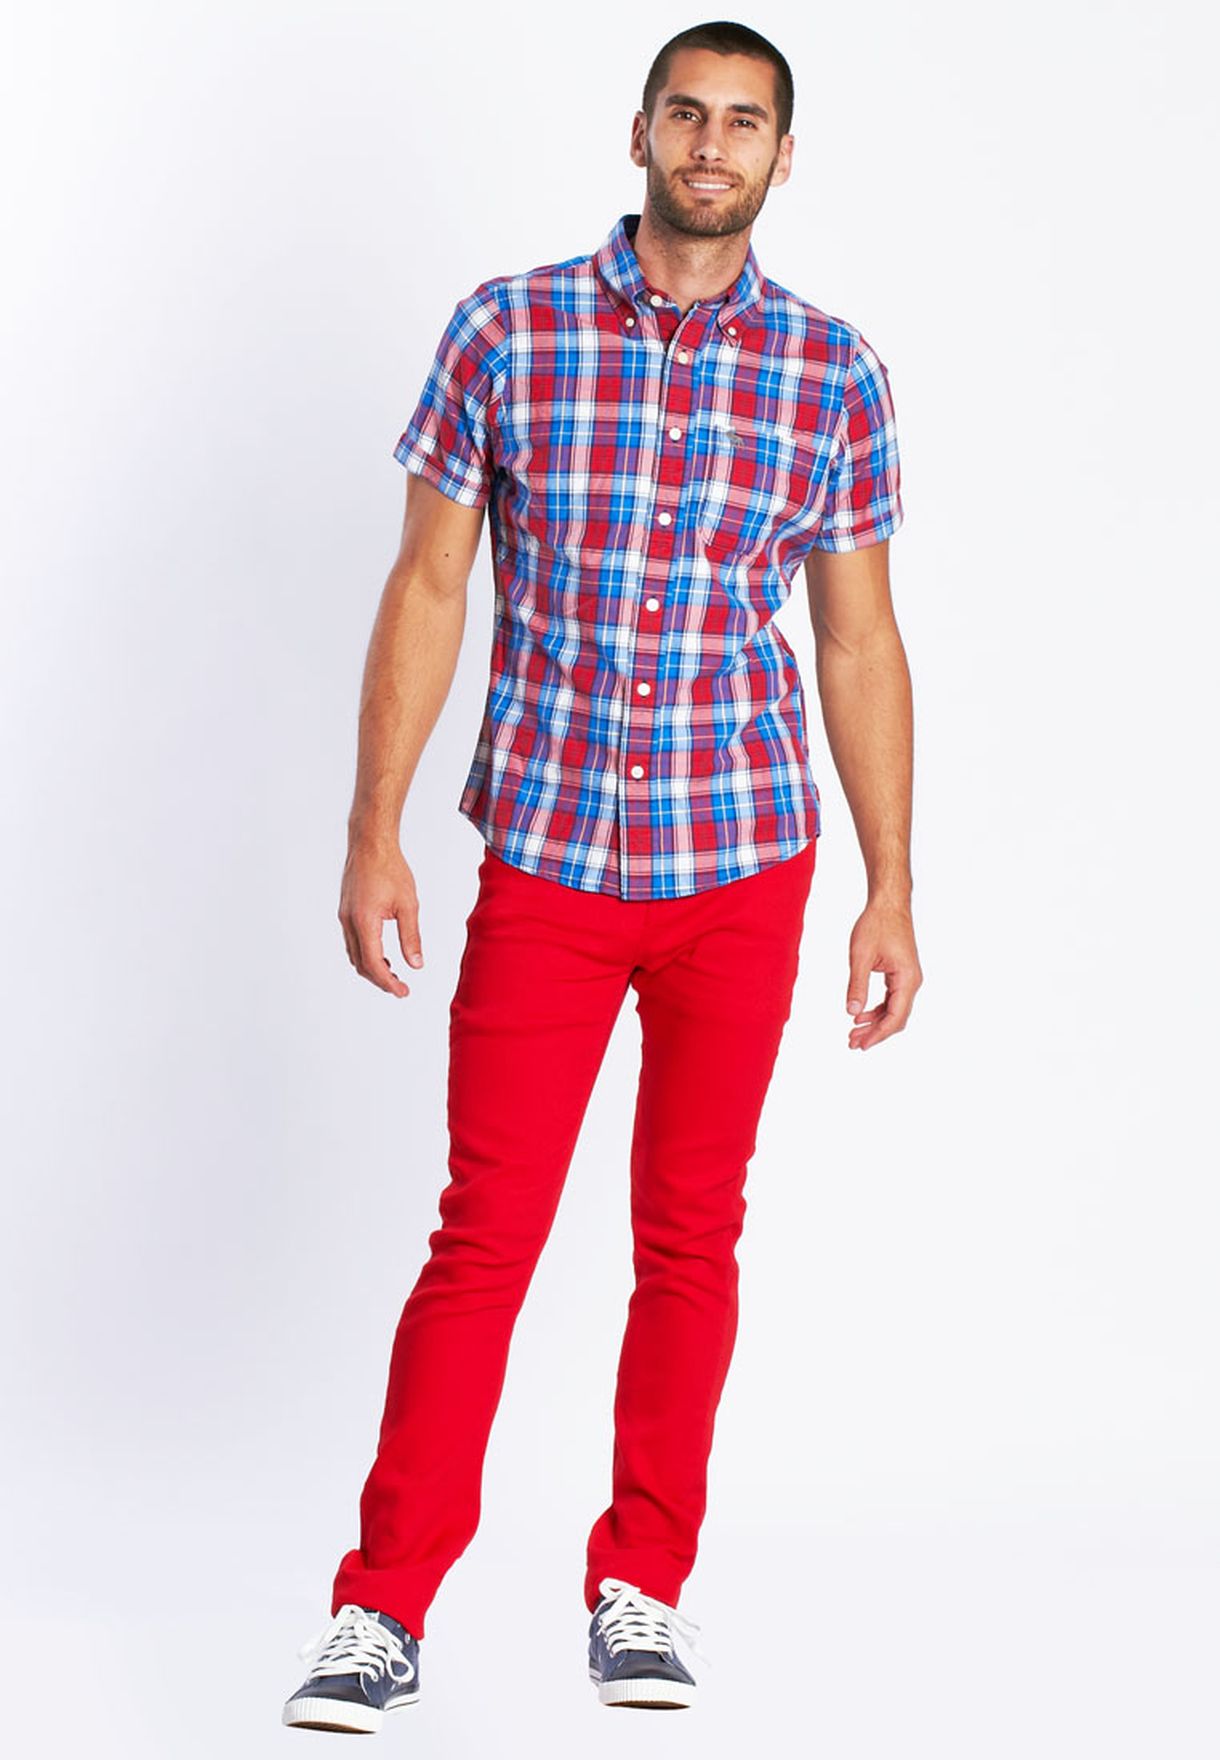 red skinny jeans male